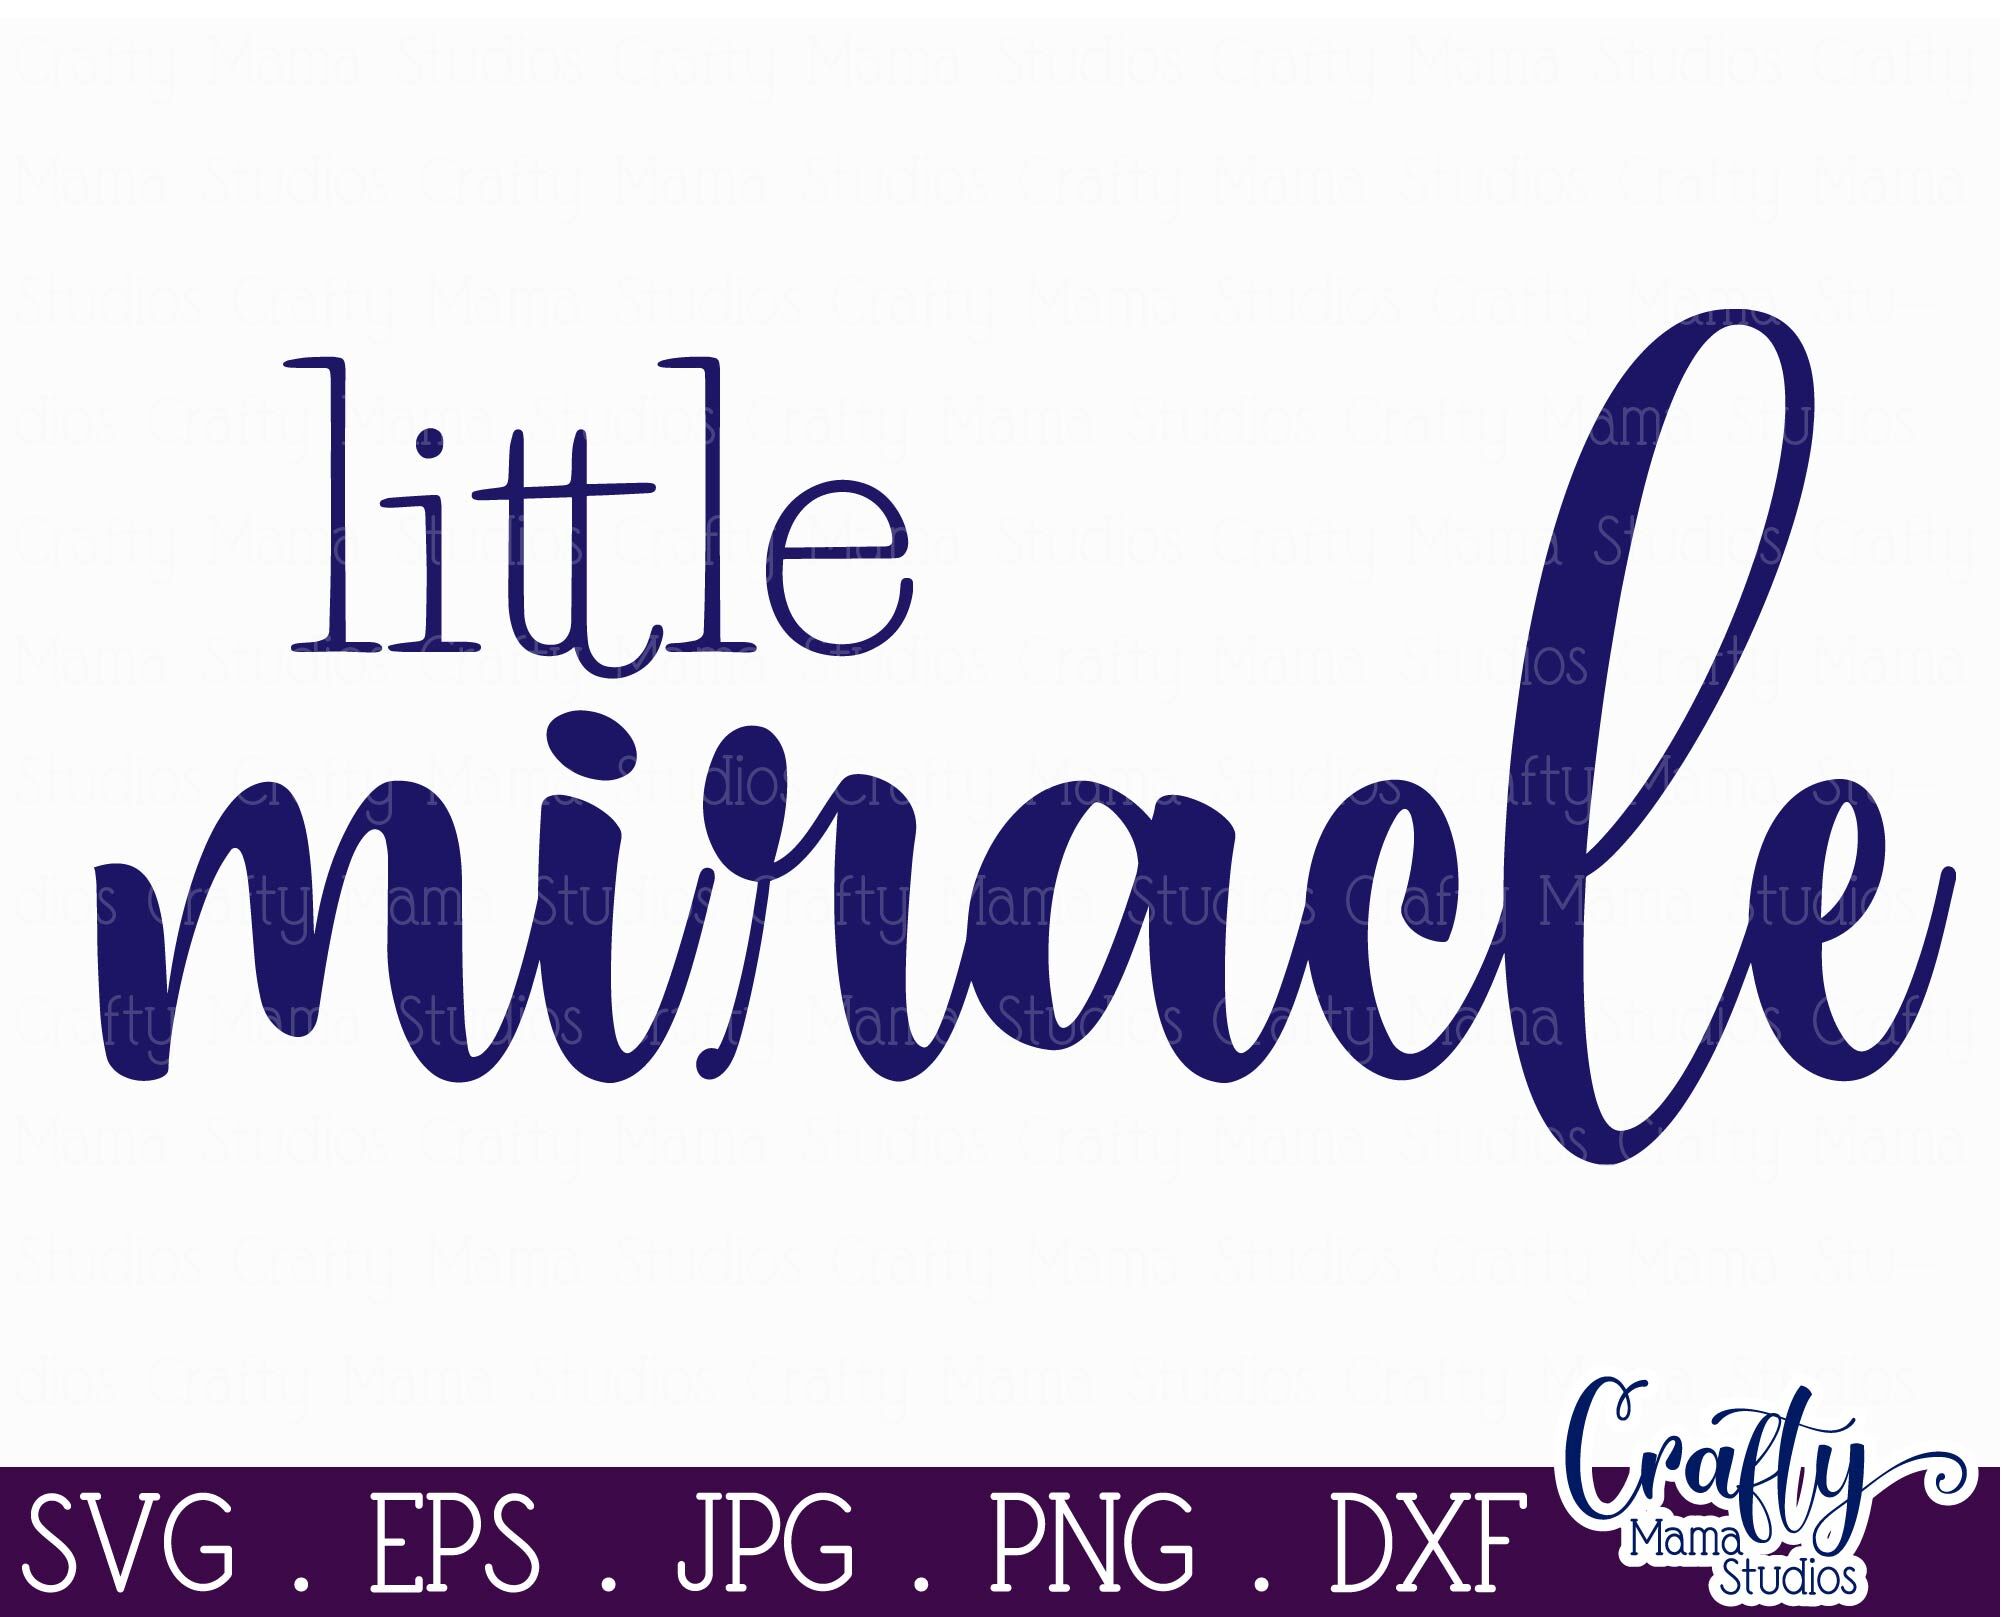 Mama's Little Miracle Decal